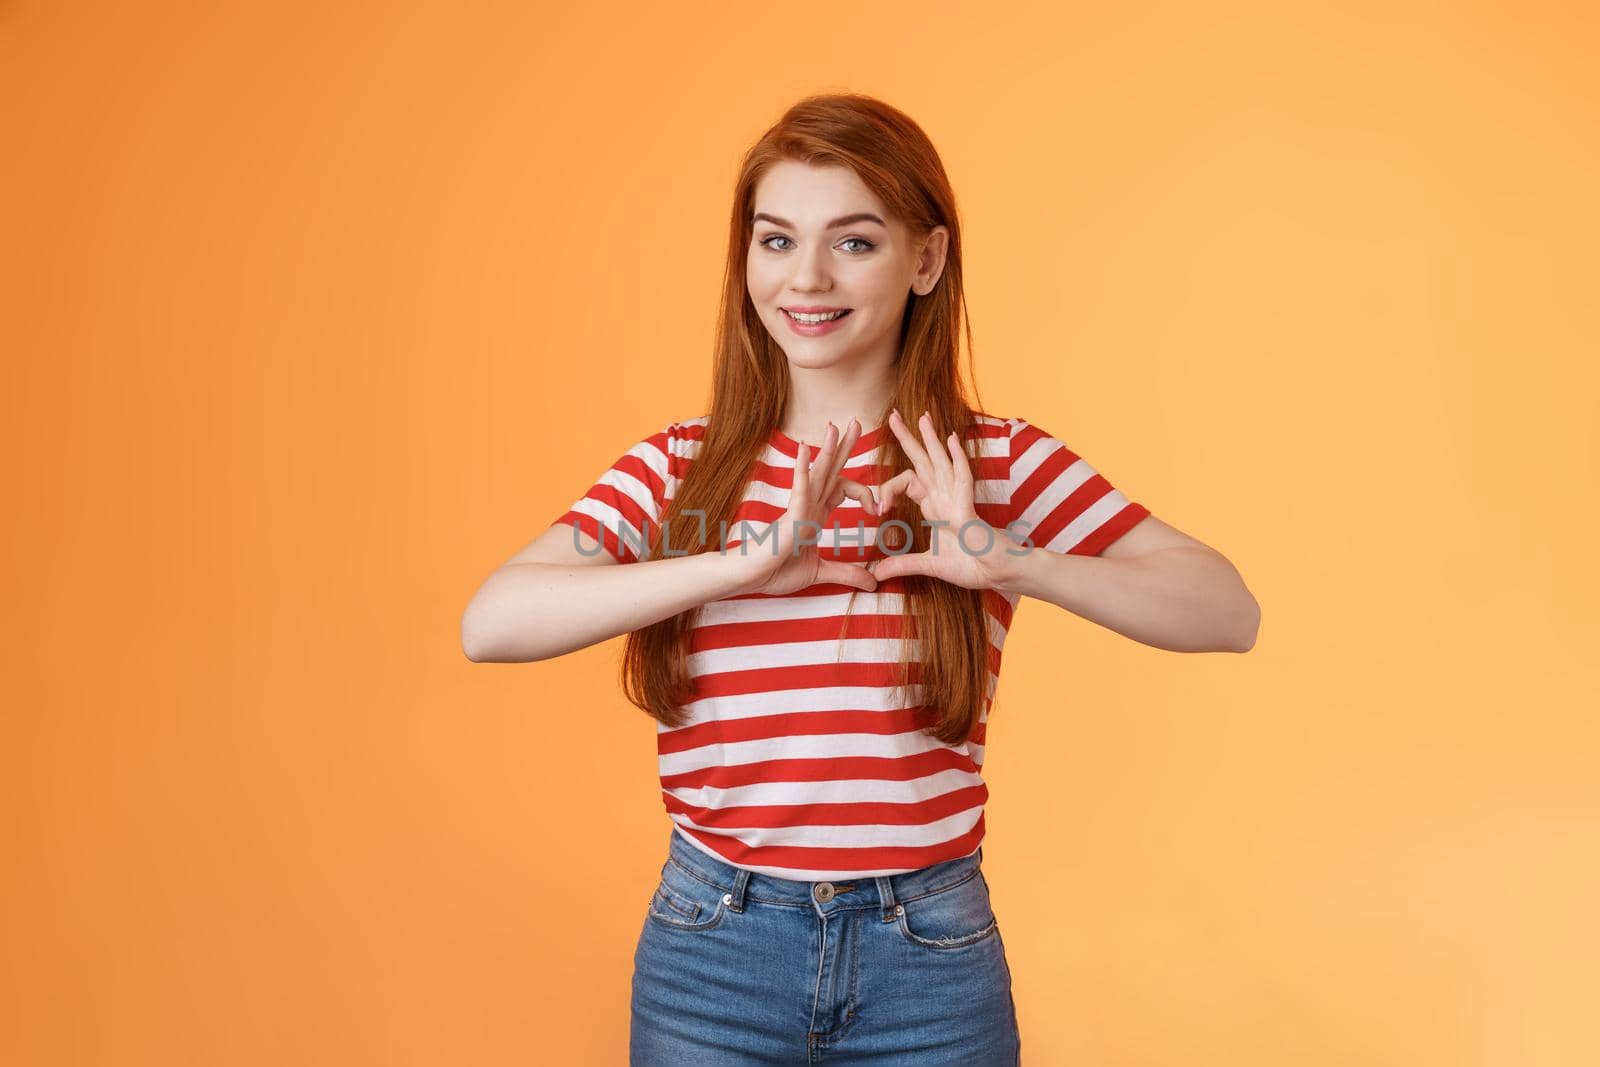 Cute lovely cheerful redhead girlfriend express love and cherish relationship, celebrating anniversary show heart sign, smiling tenderly, confess sympathy, stand orange background by Benzoix